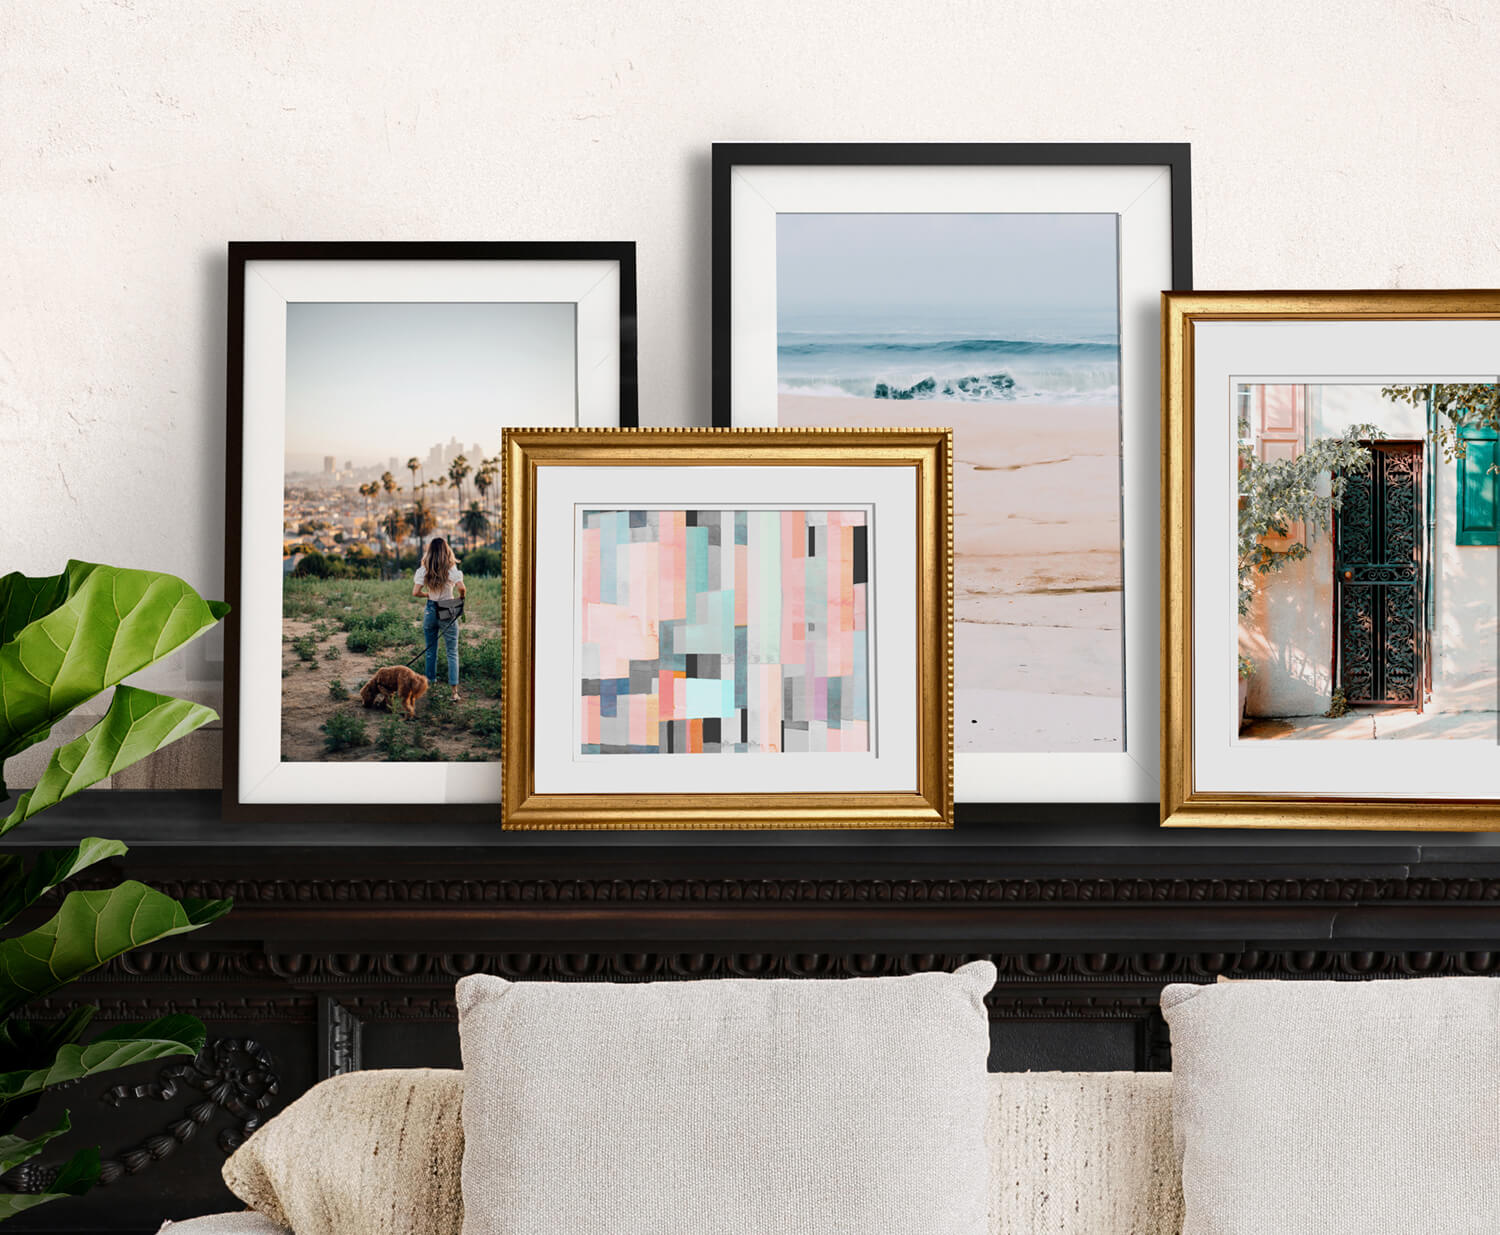 2021 Picture Frame Trends